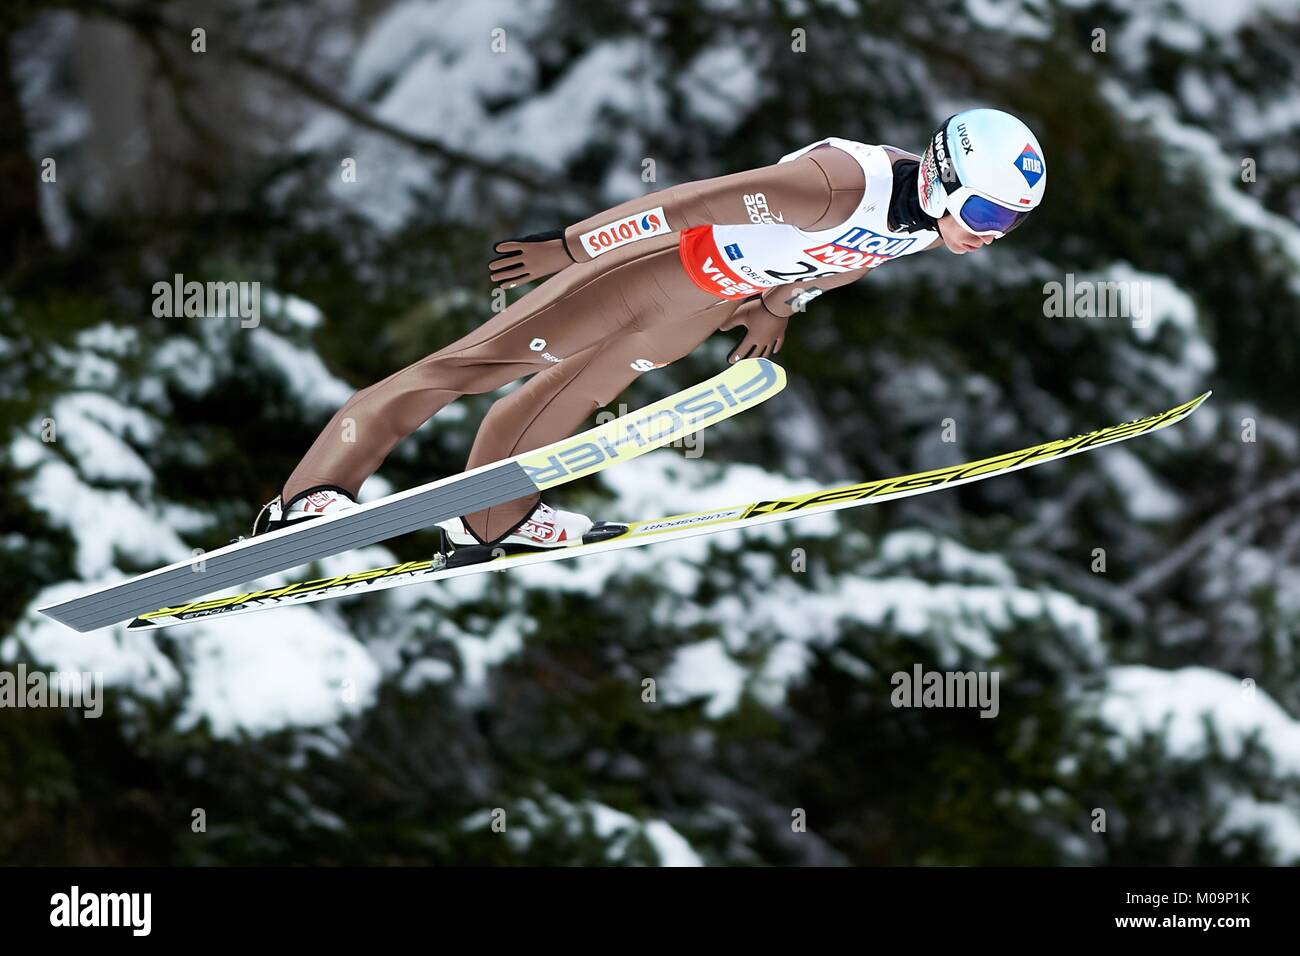 Oberstdorf, Germany. 20th Jan, 2018. FIS Ski Flying World Championships 2018 on January 20, 2018 in Oberstdorf, Germany. In the picture: Kamil Stoch Credit: East News sp. z o.o./Alamy Live News Stock Photo